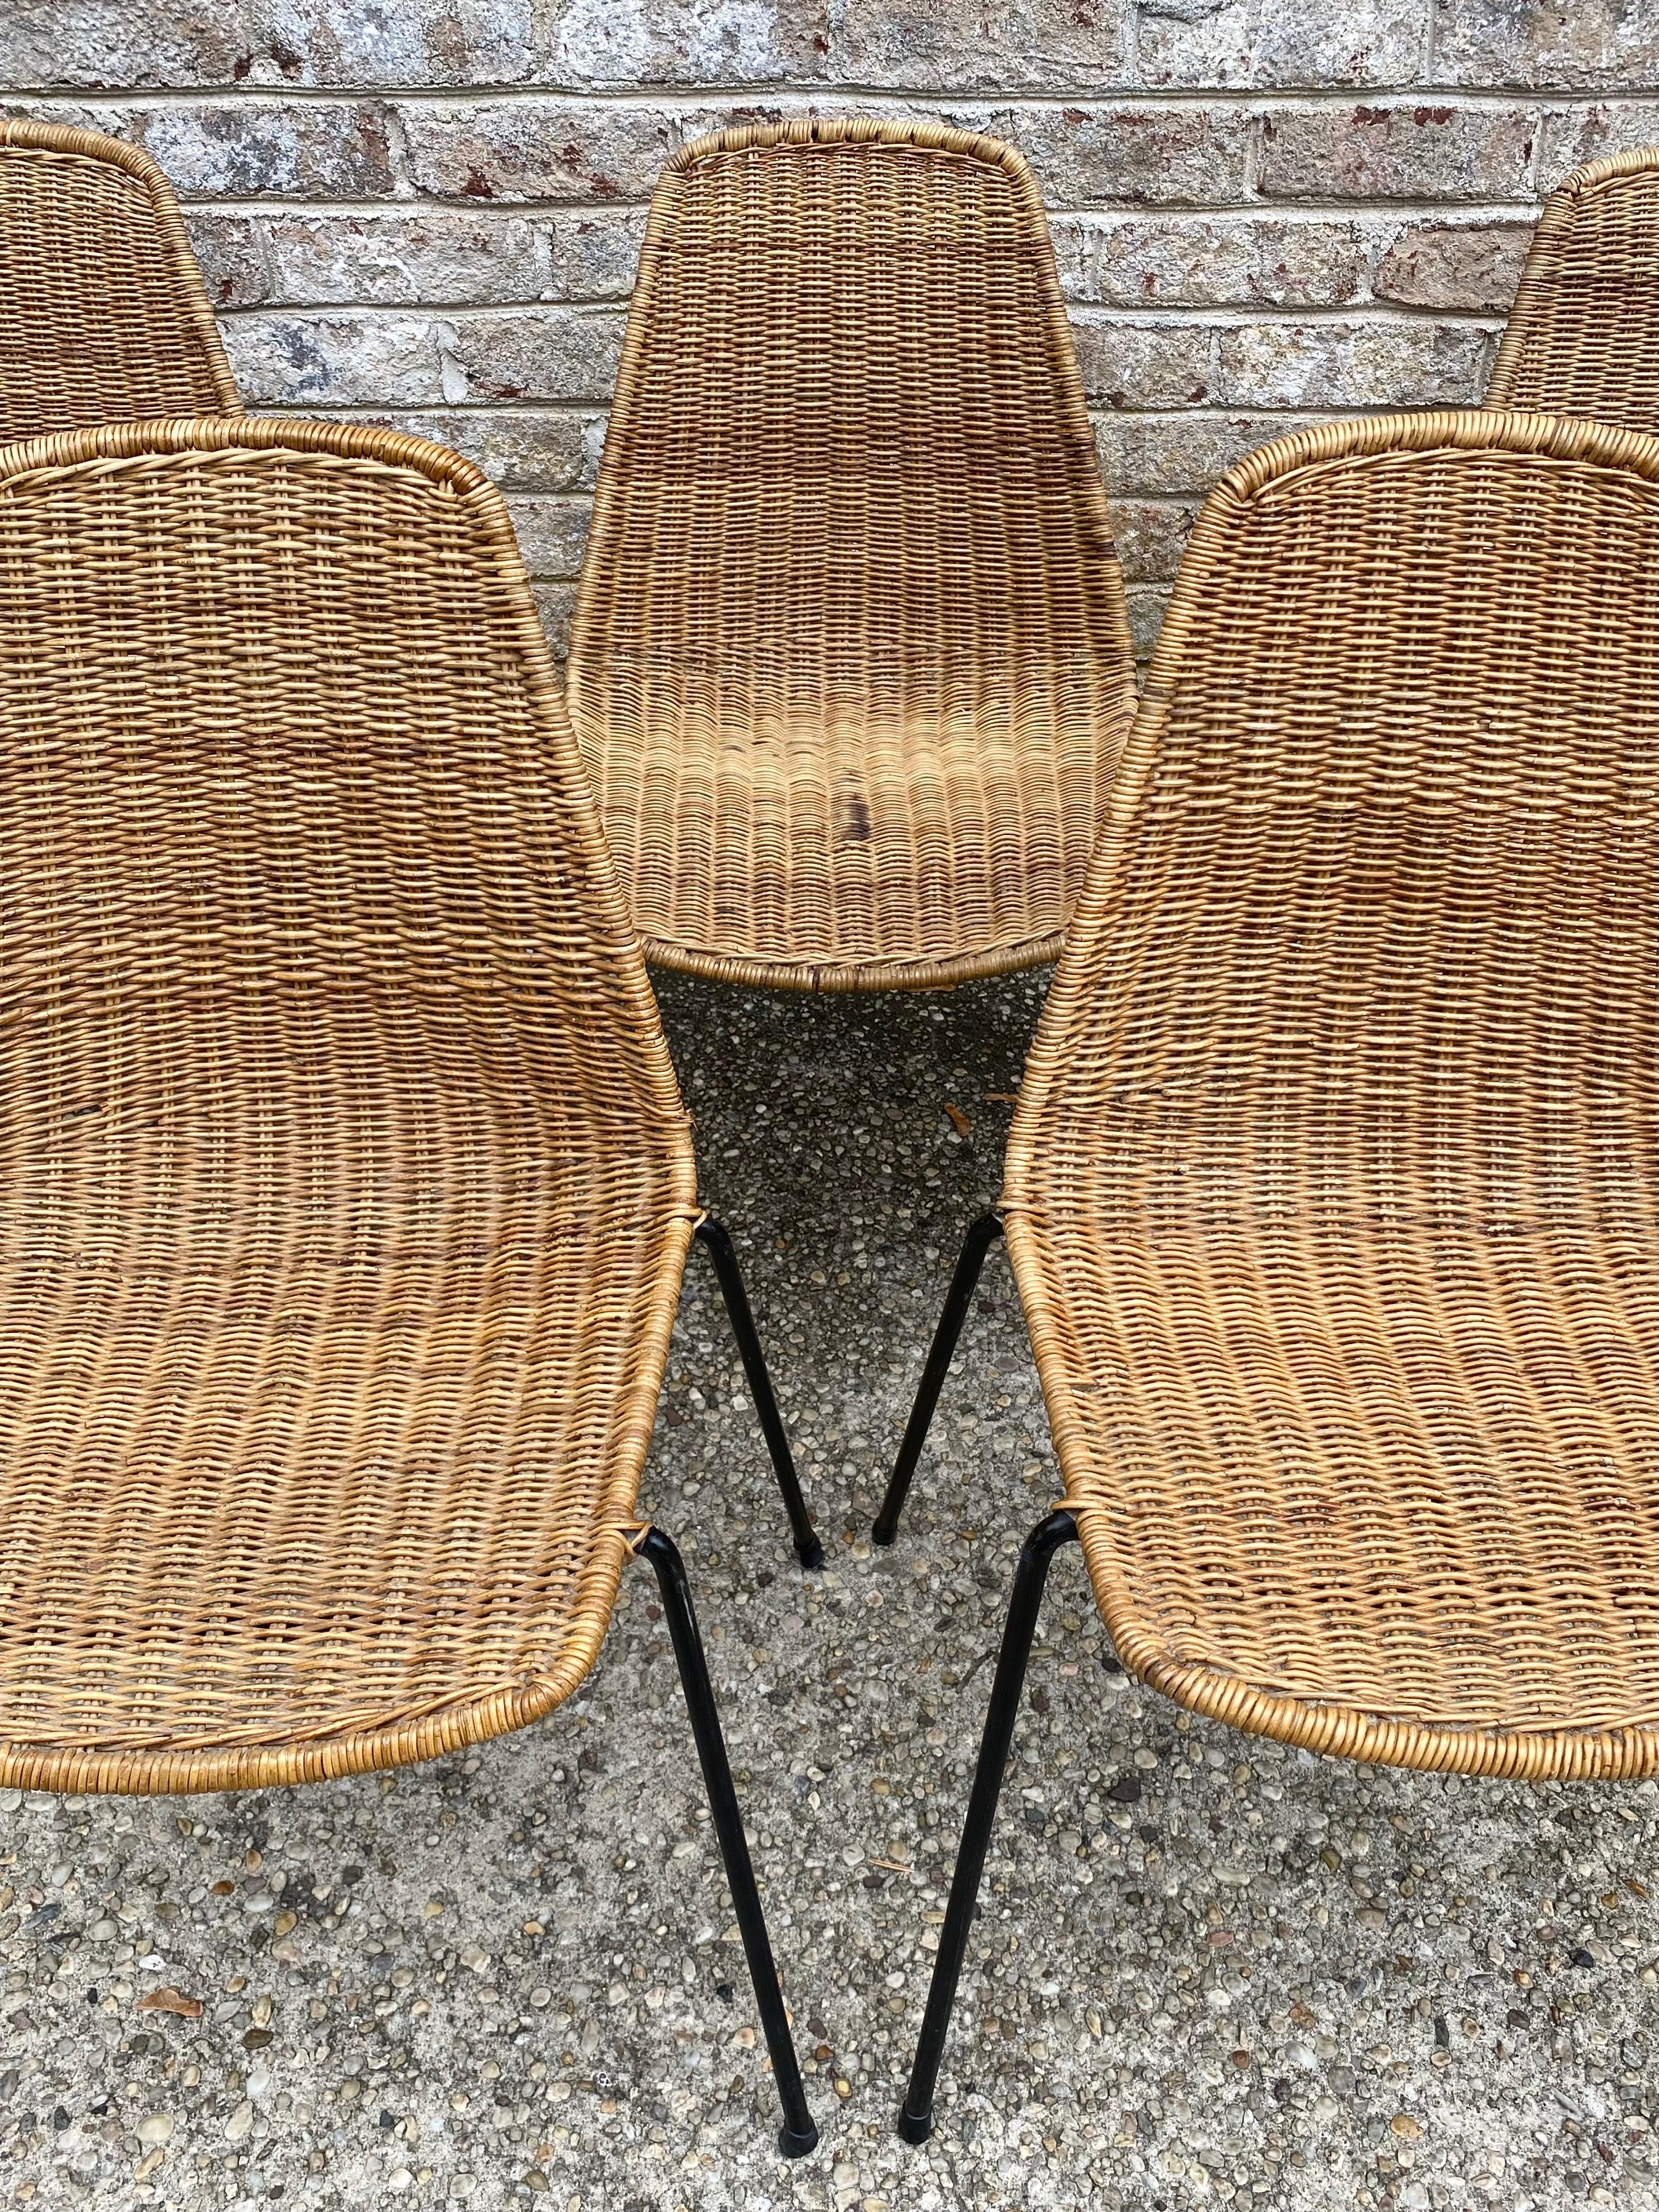 Set of 5 Gian Franco Legler Basket Chairs In Good Condition For Sale In East Hampton, NY